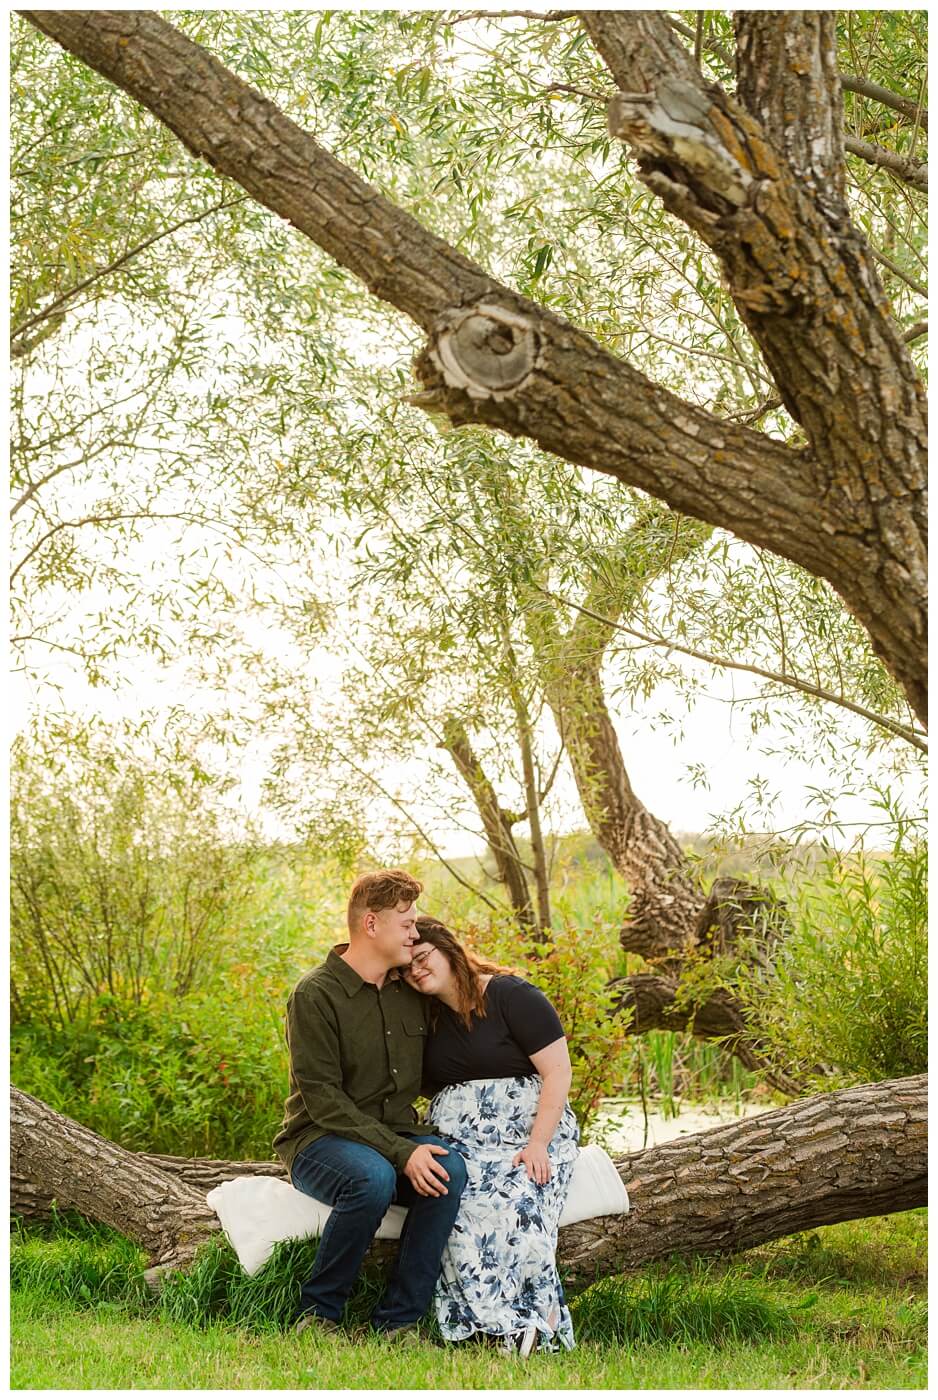 Kenny-Marrick-Engagement-Our-Lady-of-Lourdes-Shrine-05-Couple-sit-under-a-large-tree